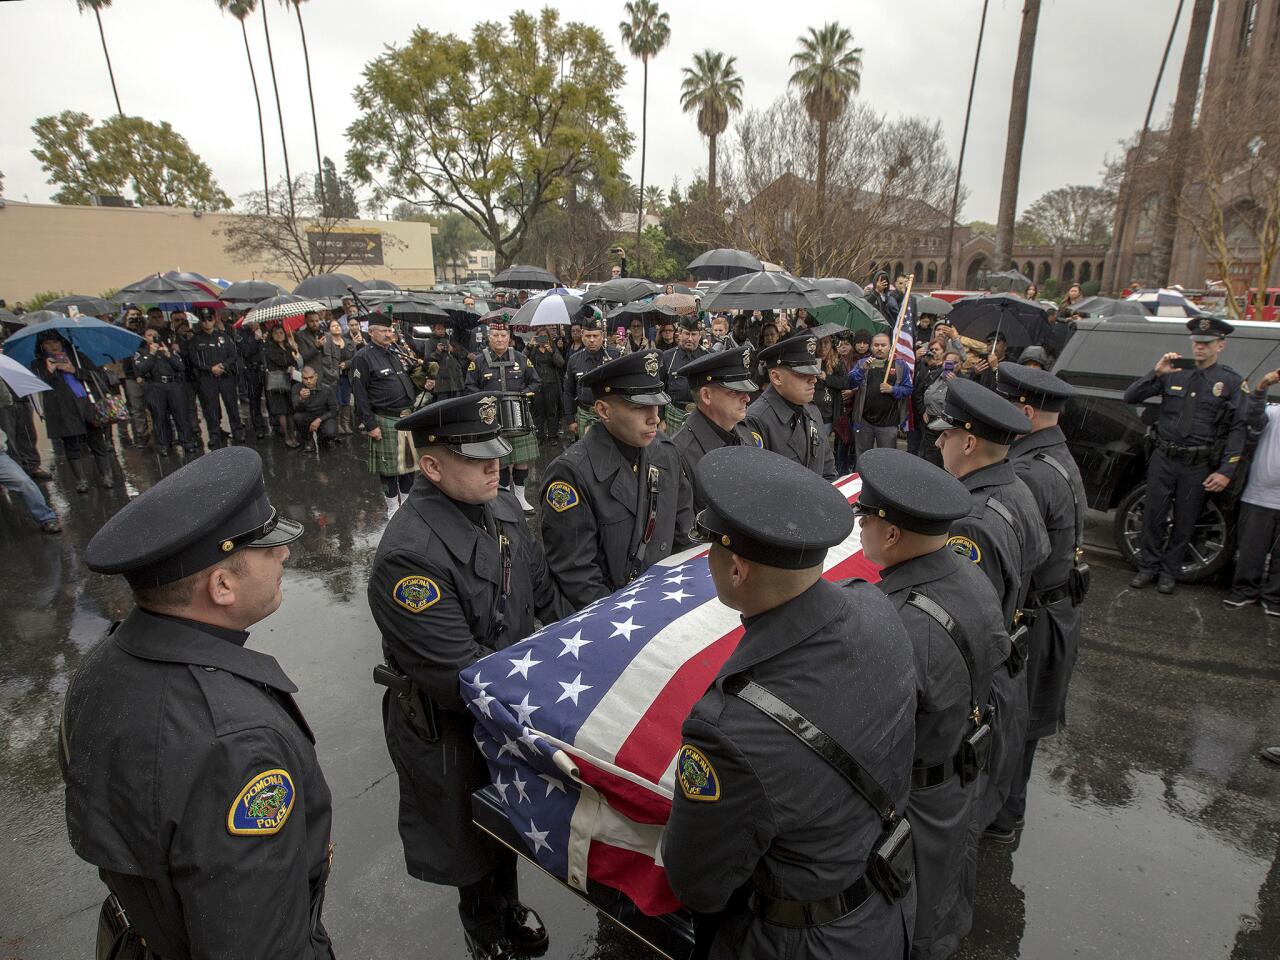 People stand in rain as Pomona Police Officer Greggory Casillas's funeral procession leaves Purpose Church for internment.